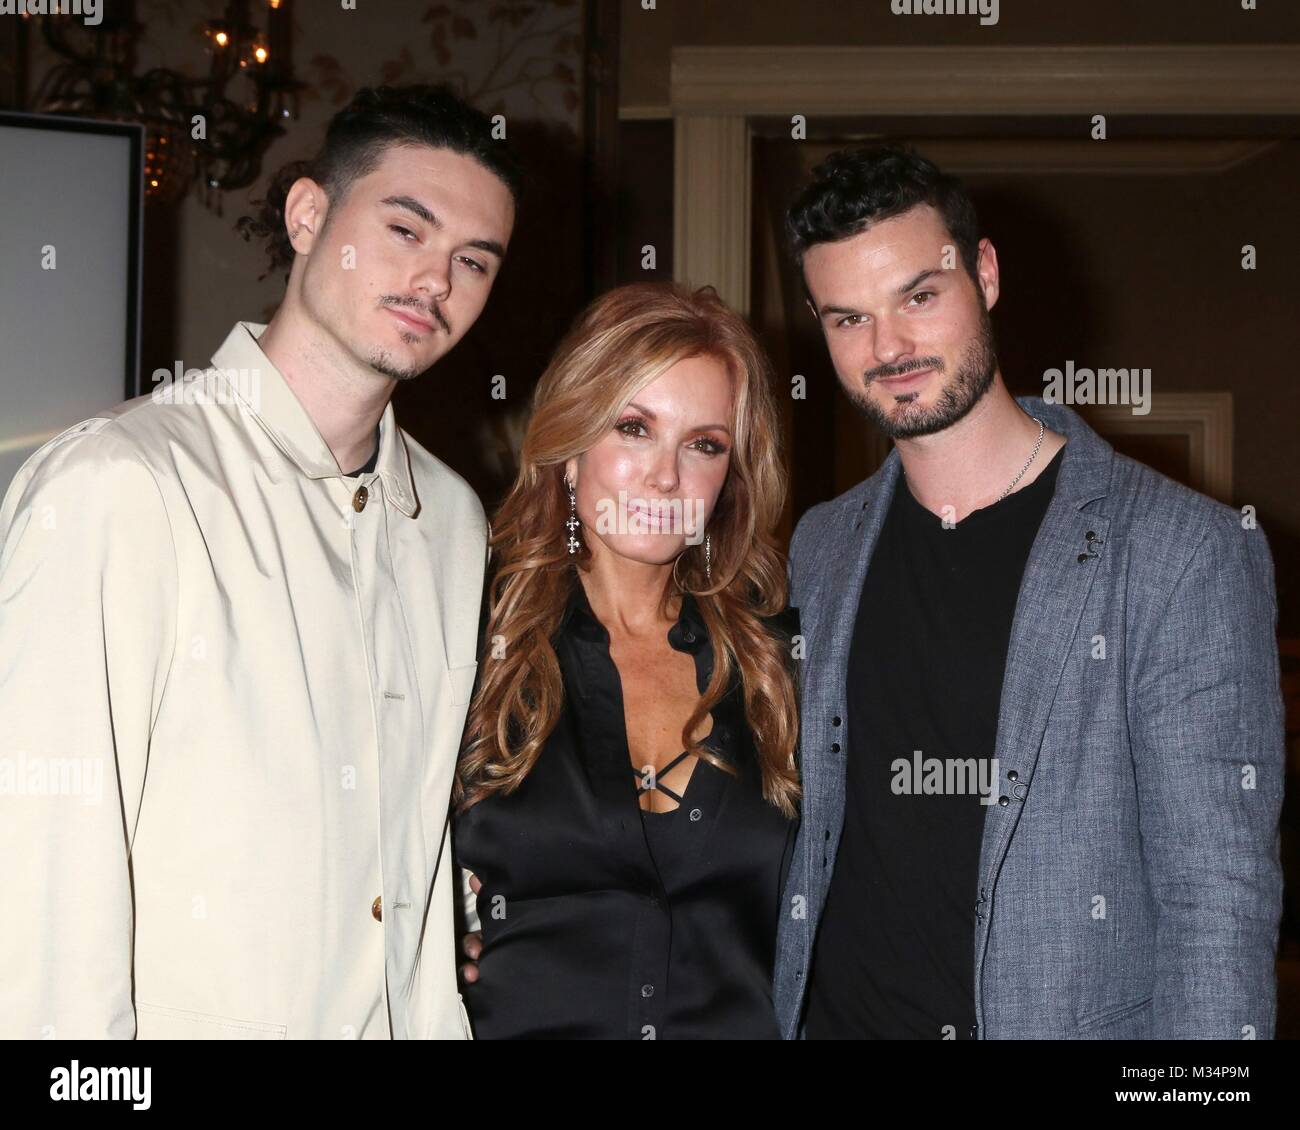 Landon Recht, Tracey Bregman, Austin Recht in attendance for Tracey Bregman 35th Anniversary on THE YOUNG AND THE RESTLESS, CBS TV City, Los Angeles, CA February 2, 2018. Photo By: Priscilla Grant/Everett Collection Stock Photo